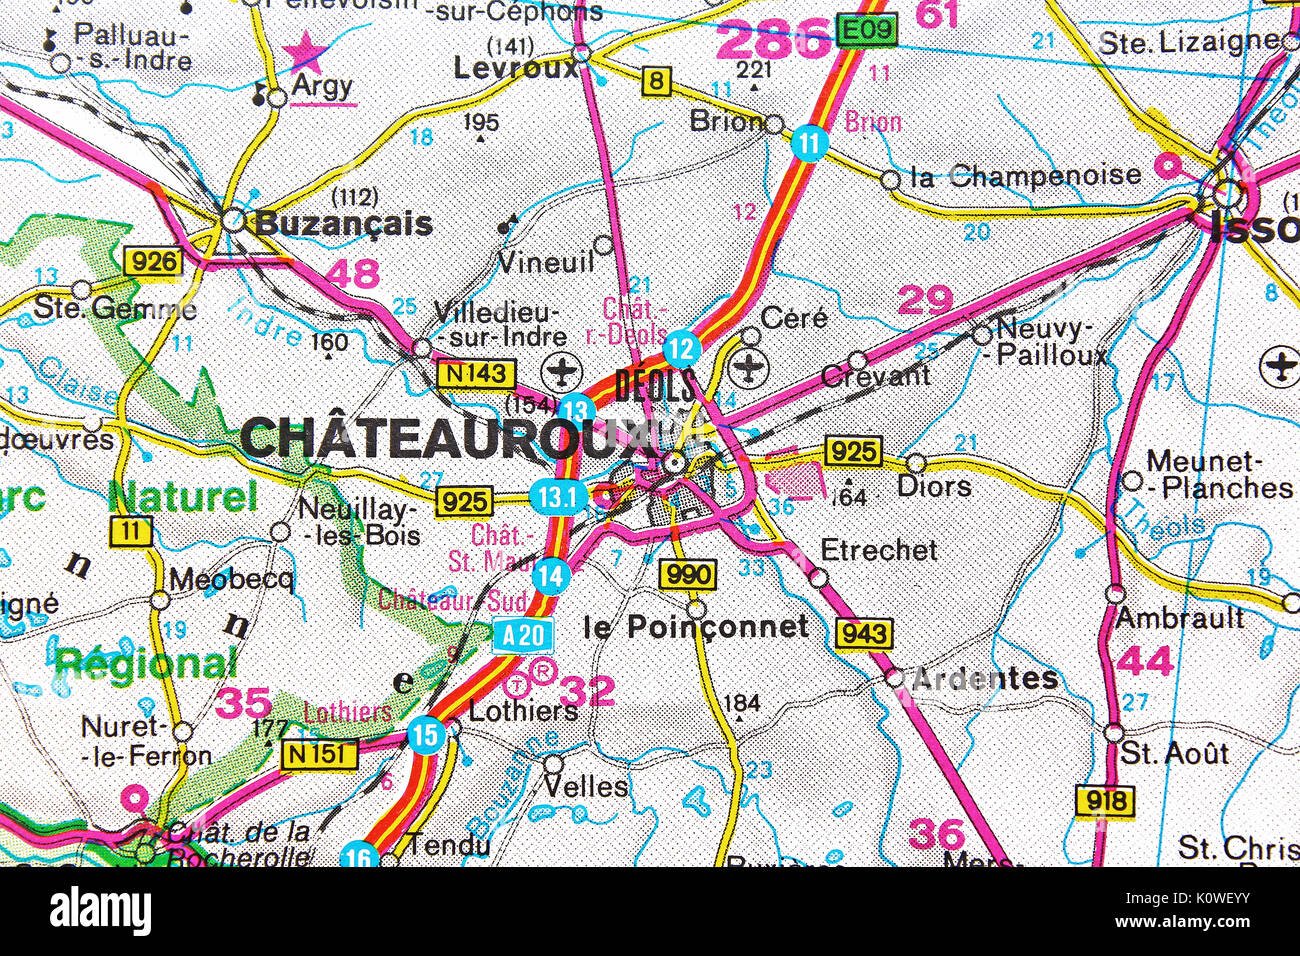 tours chateauroux mappy